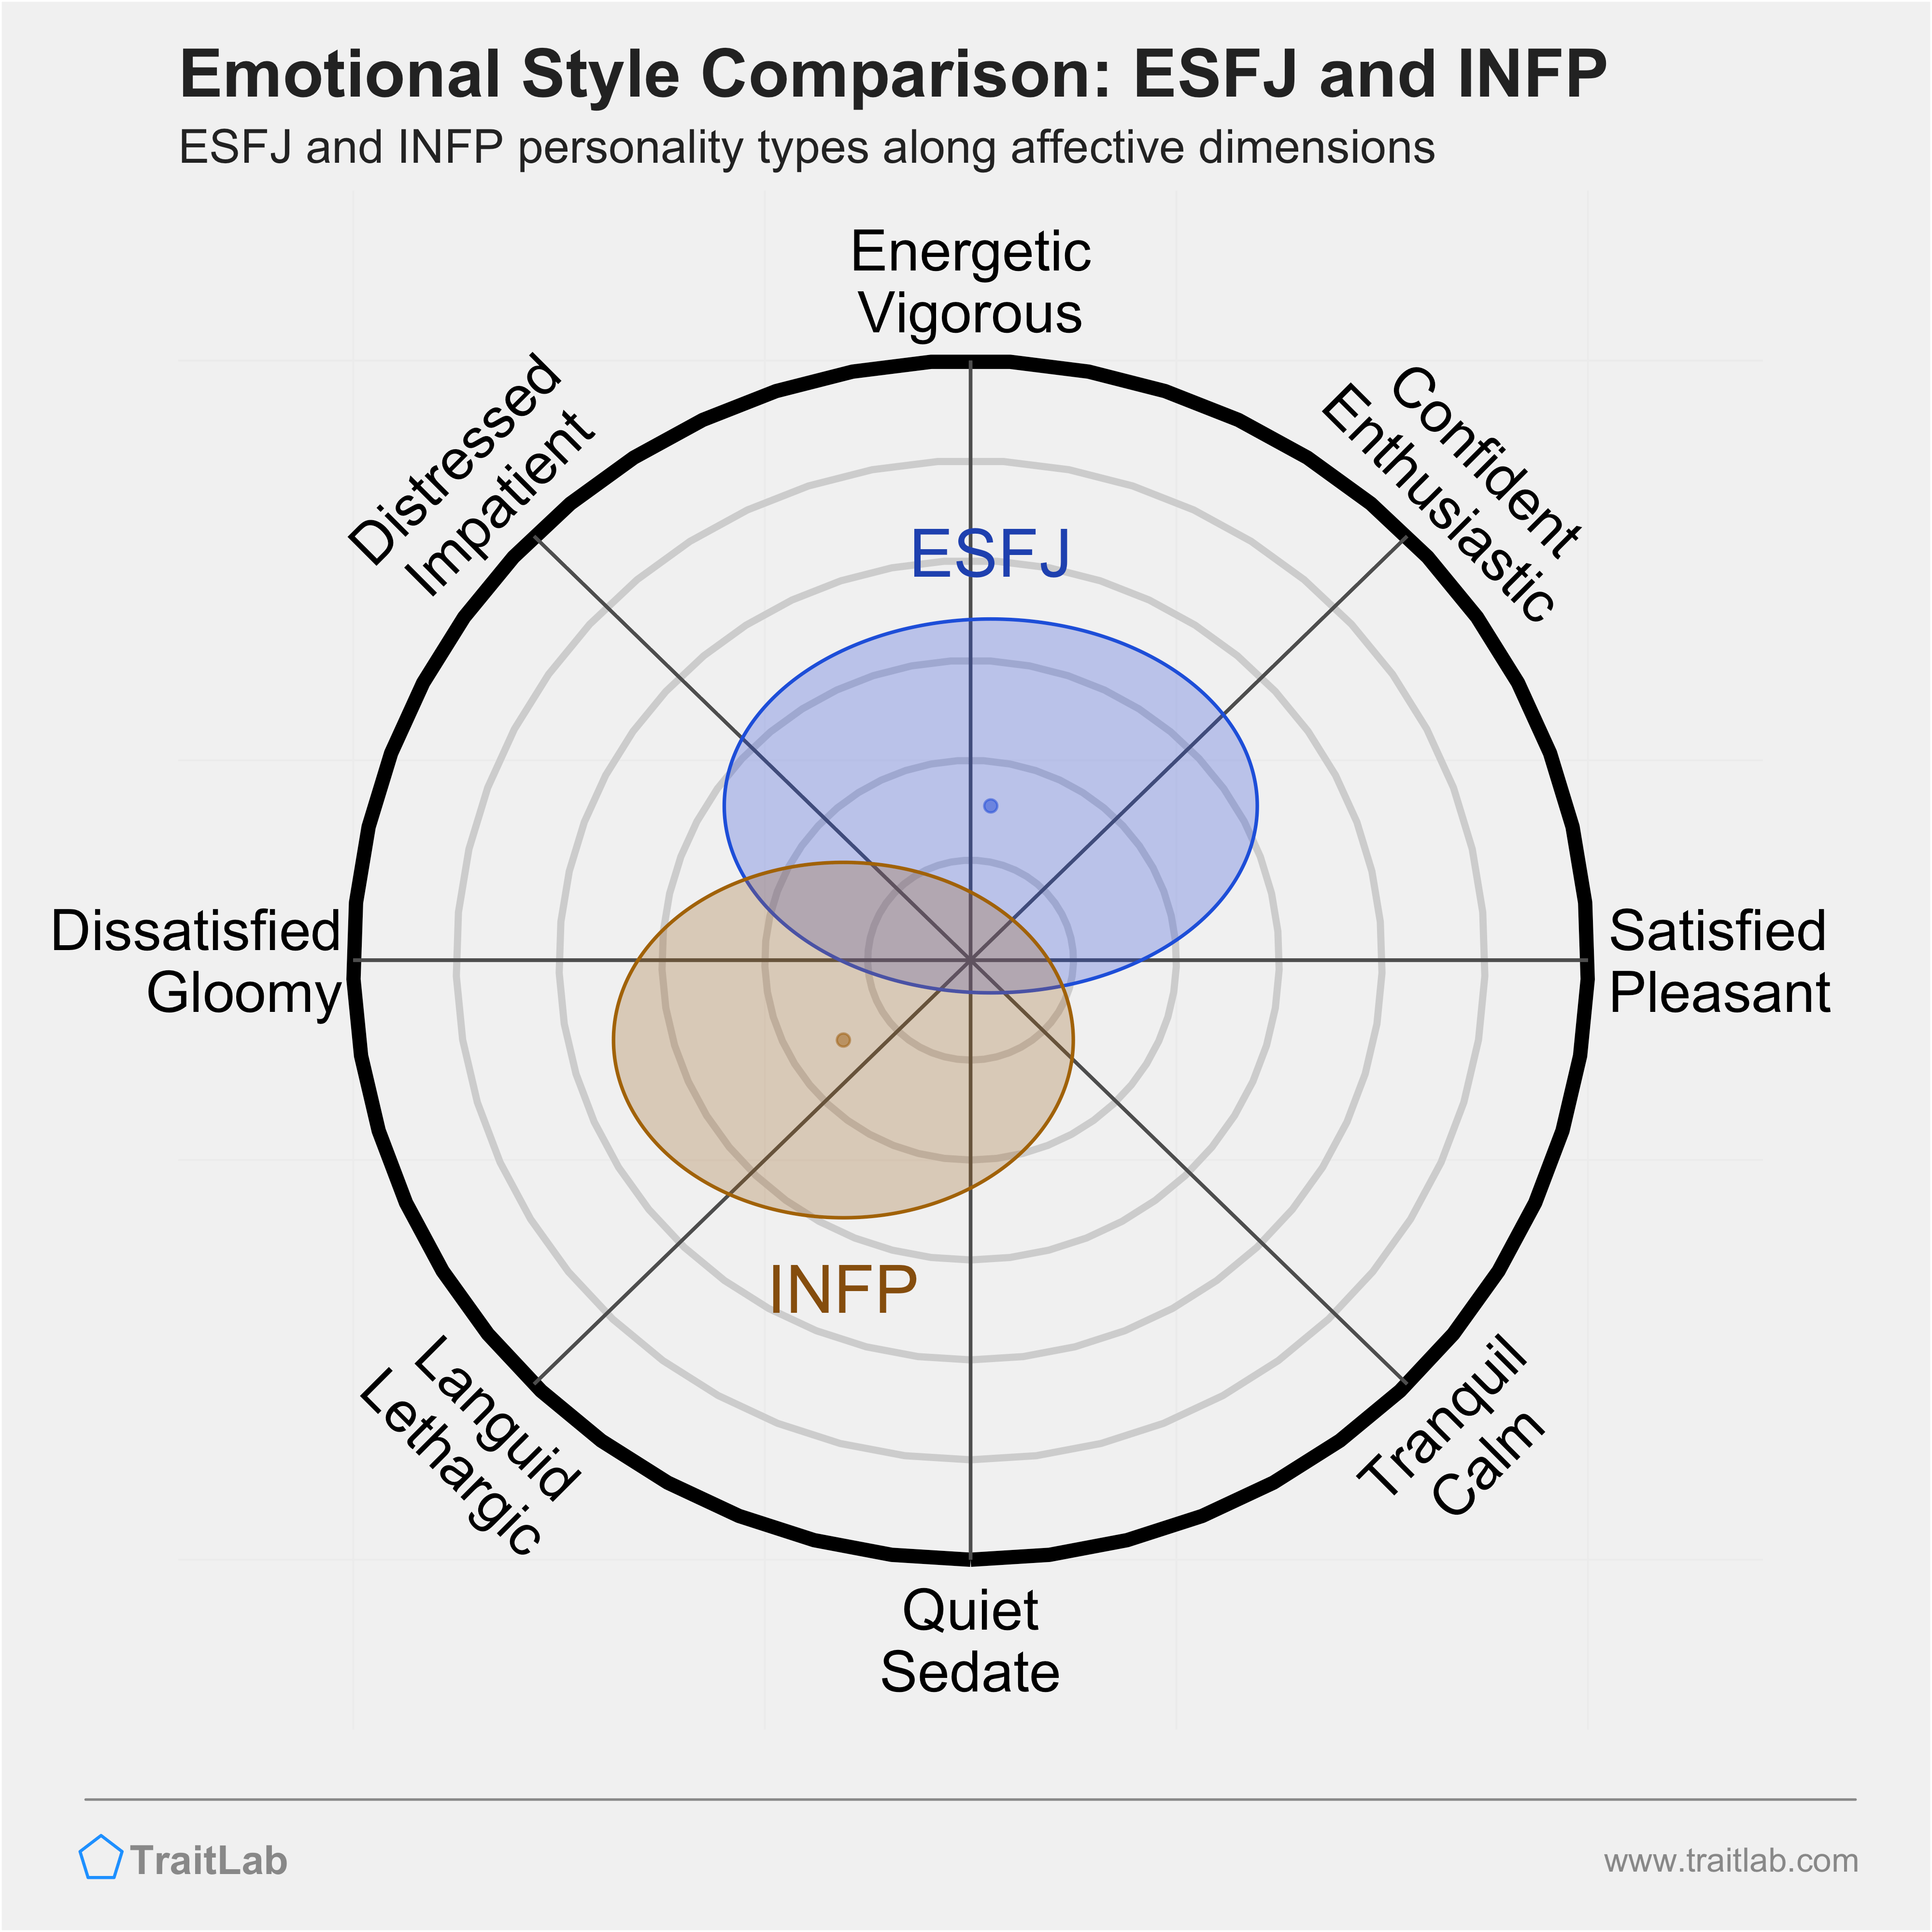 ESFJ and INFP comparison across emotional (affective) dimensions